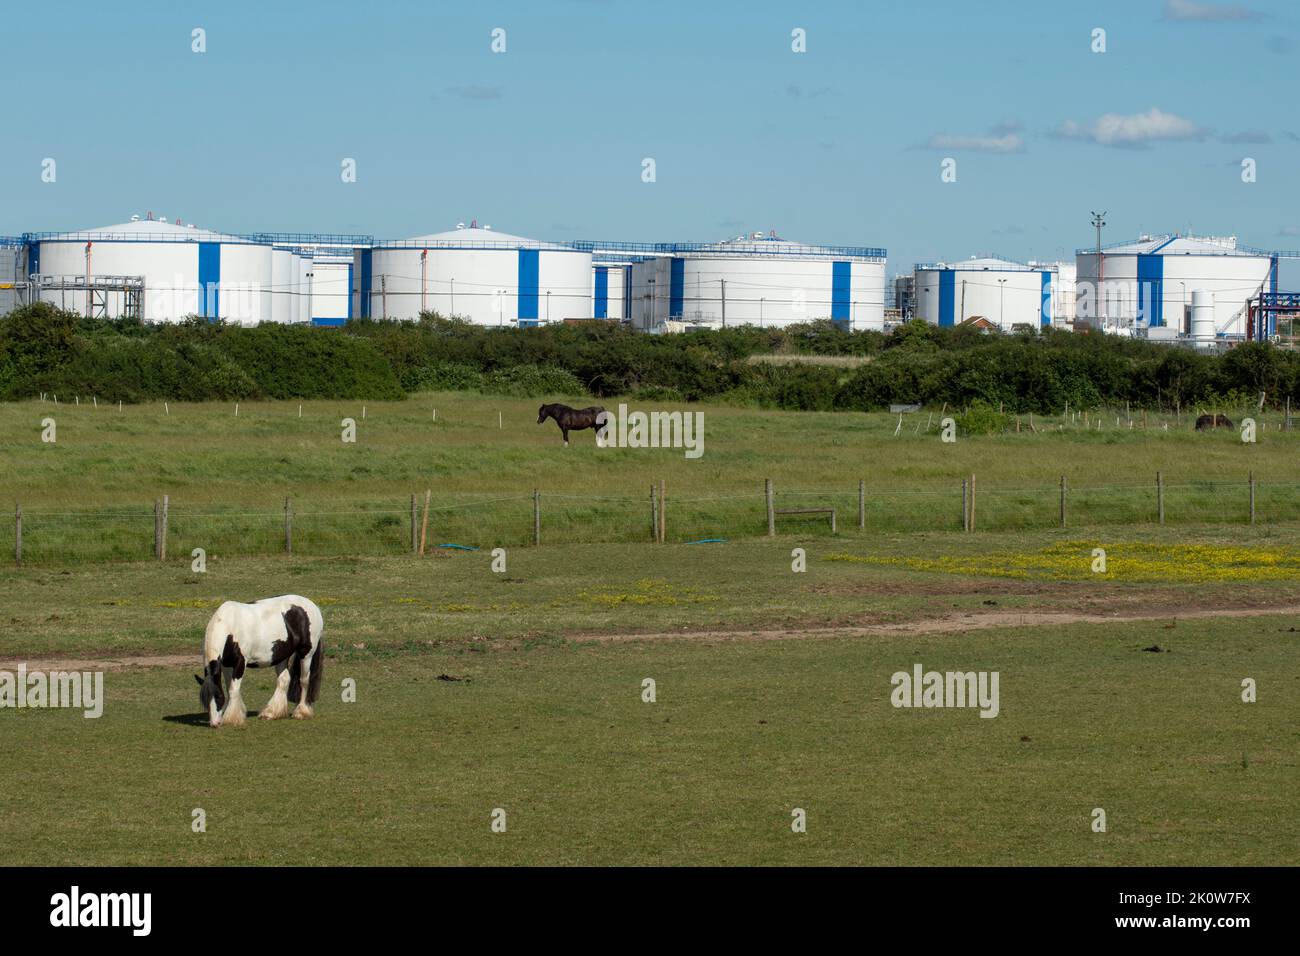 Horse in field with Oil Storage tanks in the background on Canvey Island, Essex, UK, England. Stock Photo